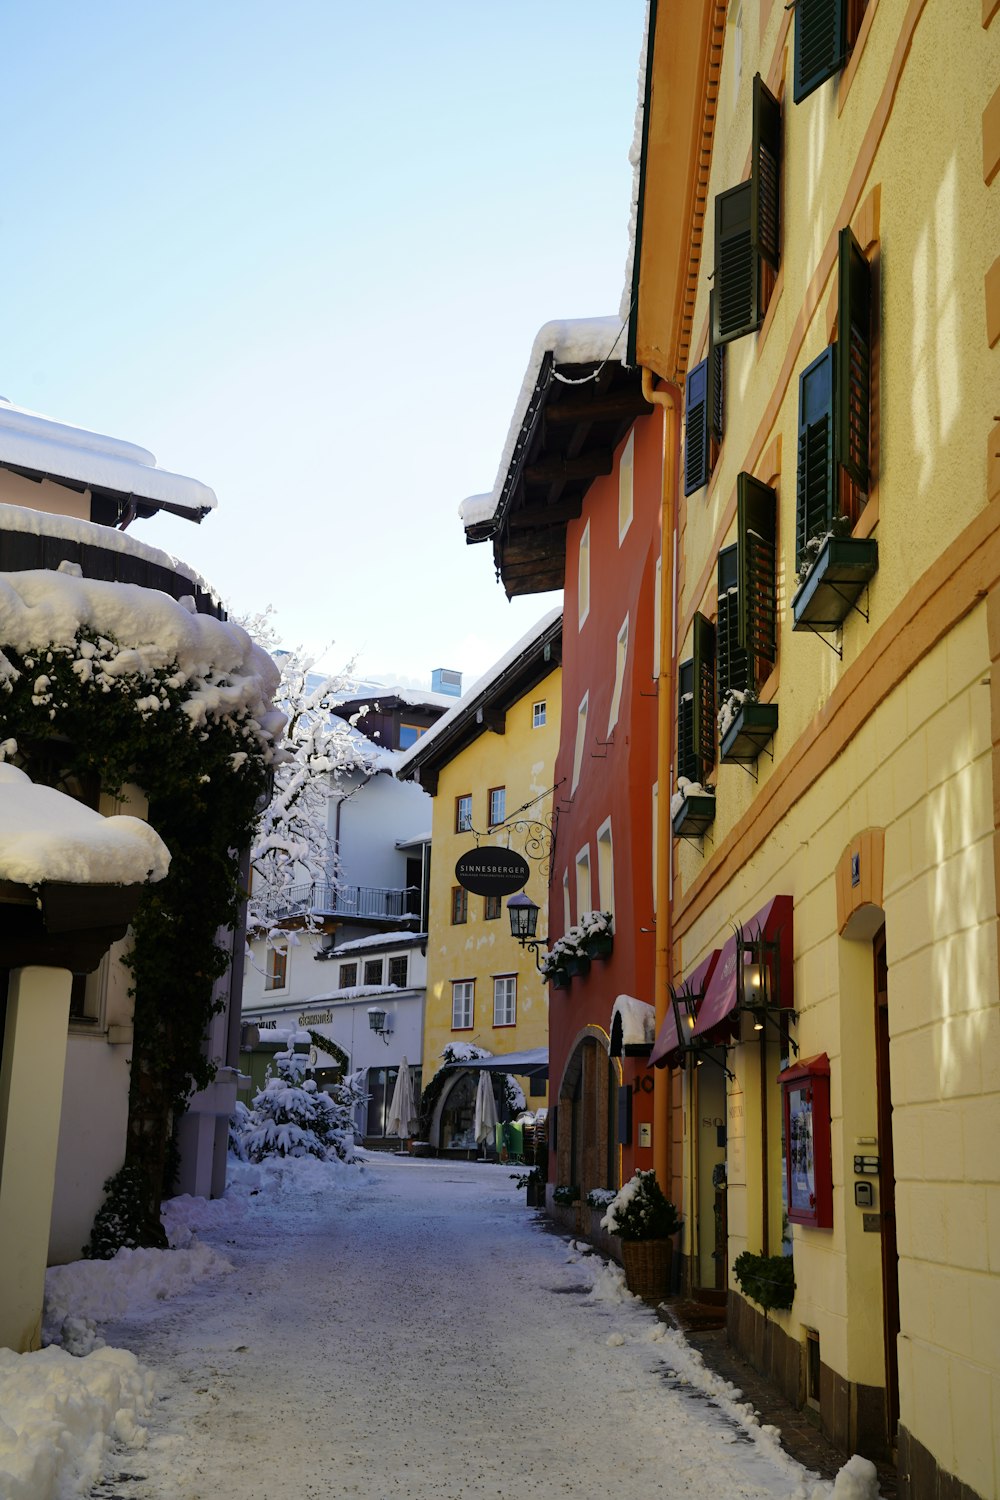 a narrow street with snow on the ground